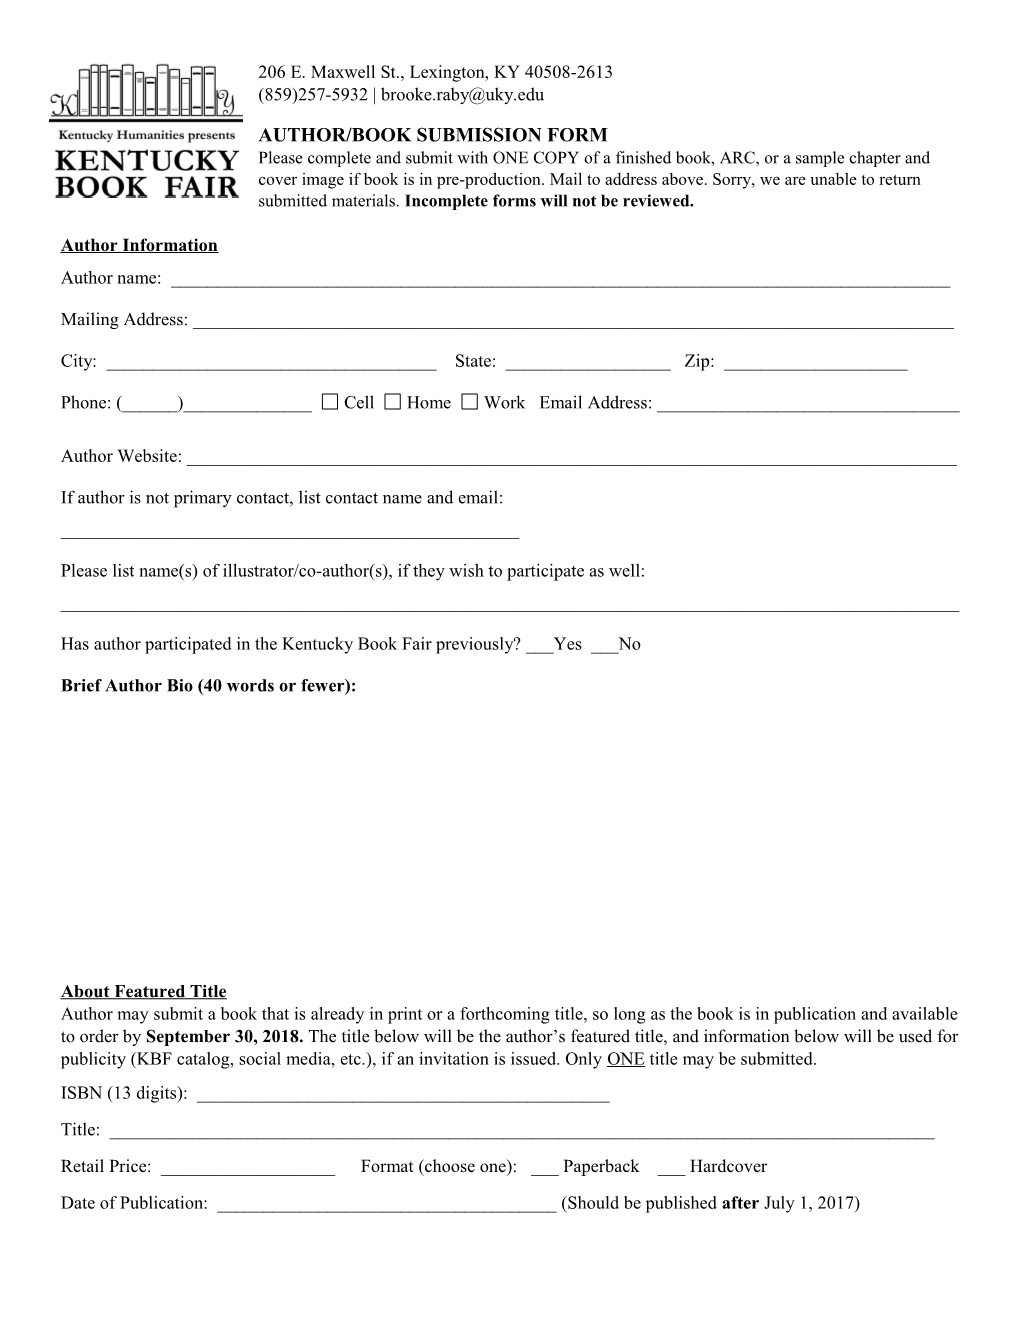 AUTHOR/BOOK SUBMISSION FORM Please Complete and Submit with ONE COPY of a Finished Book